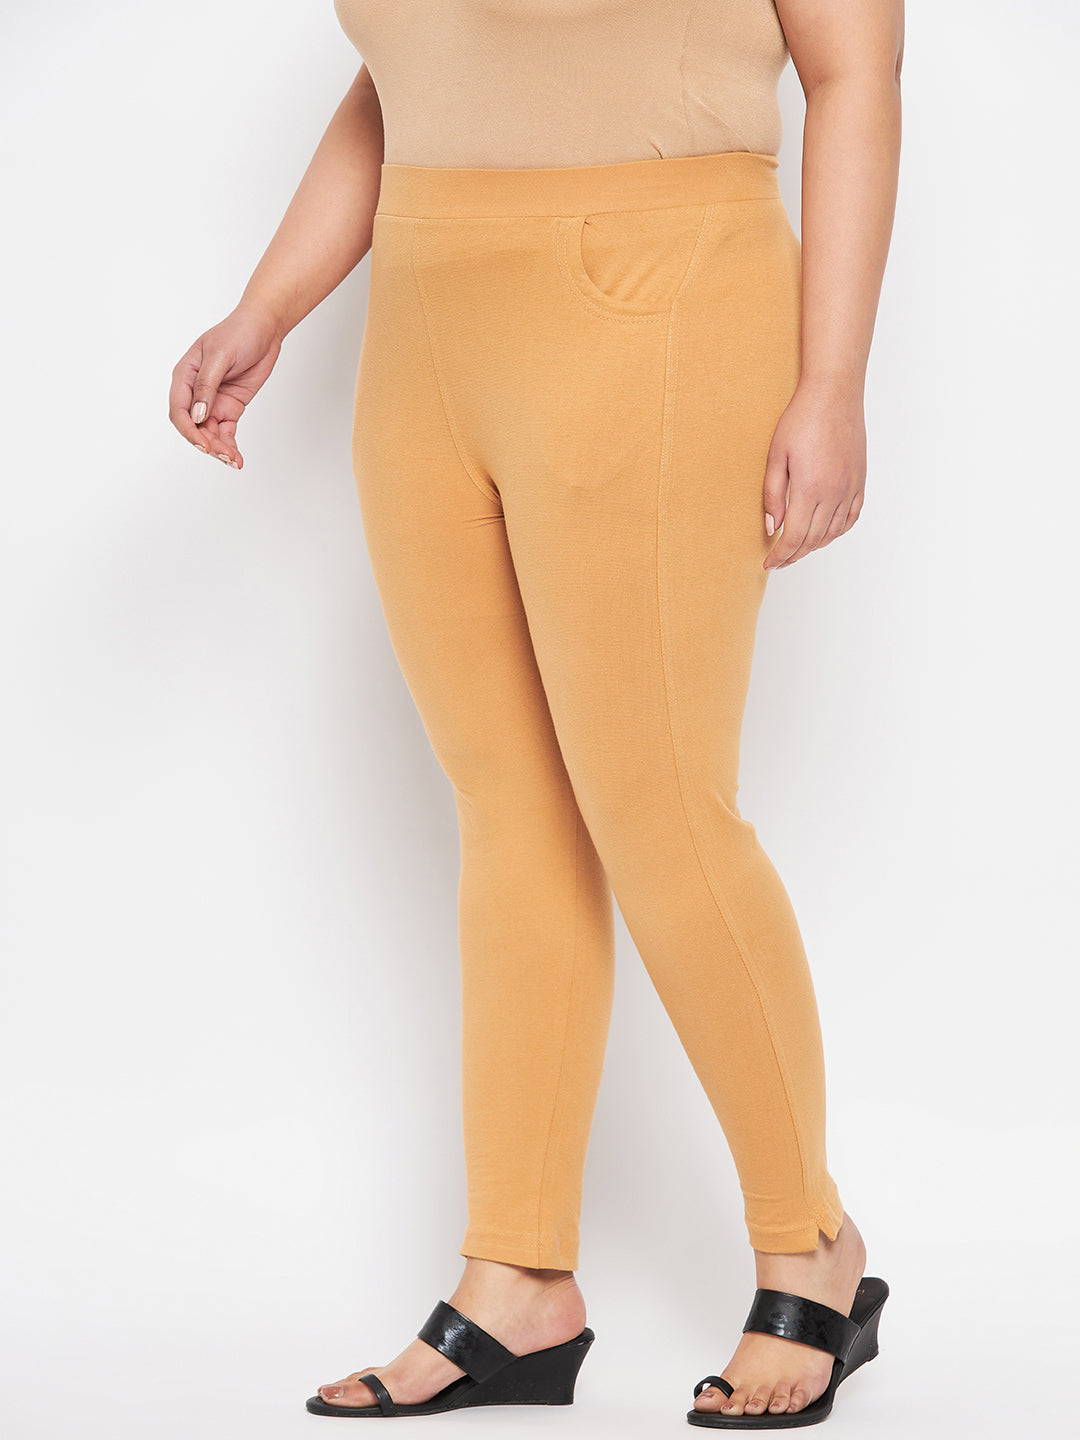 Fawn Solid Ankle Length Leggings